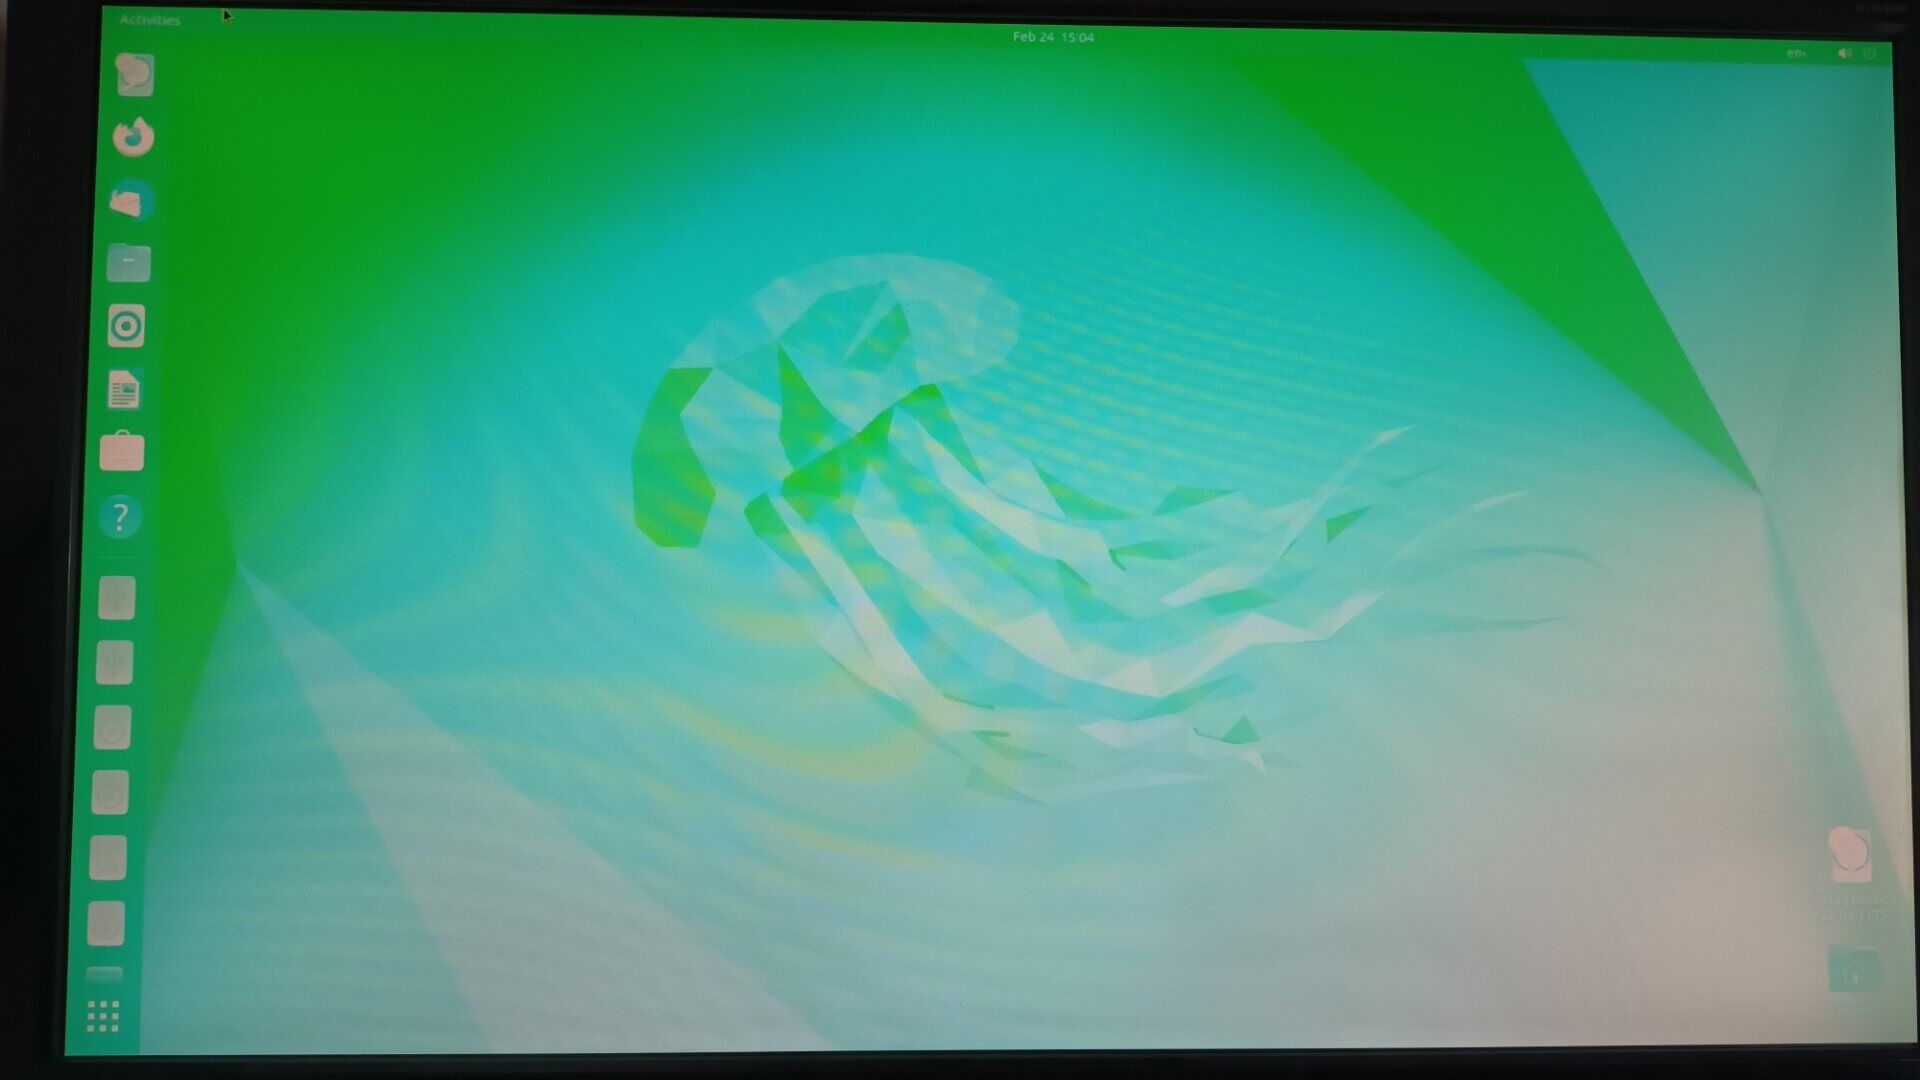 Ubuntu Live Session, with a heavy green tint